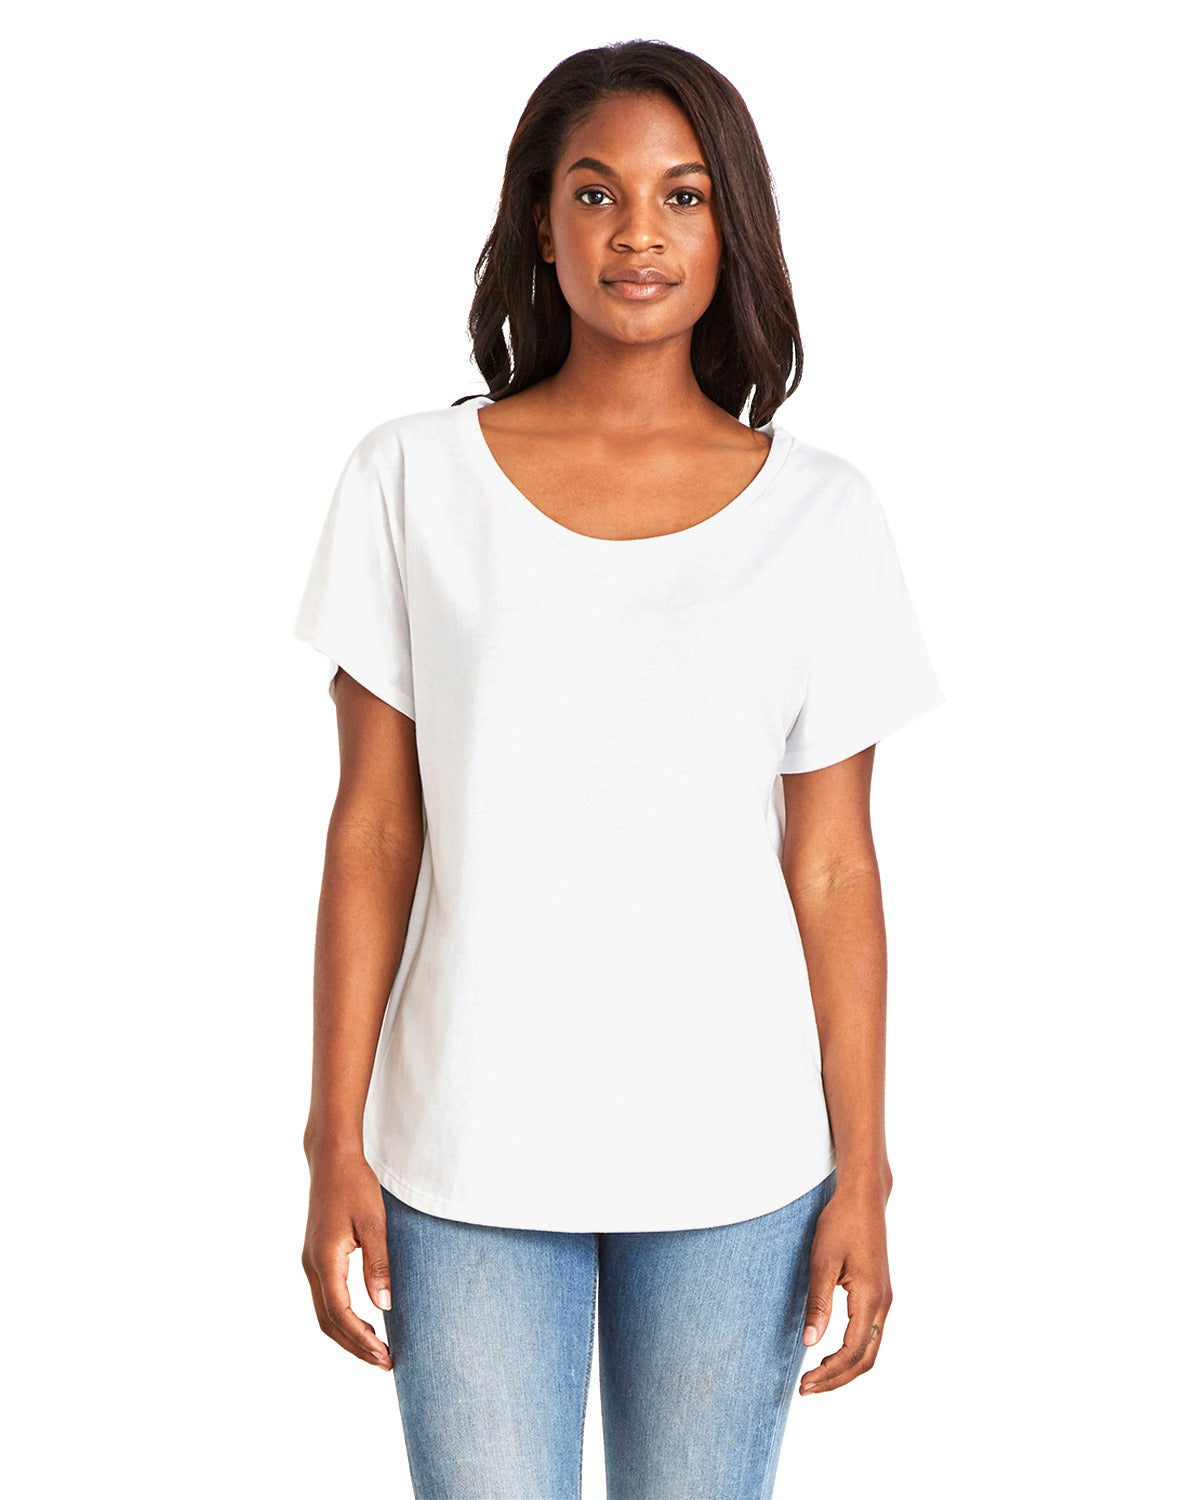 DEEP WATERS - Ladies' Dolman Relaxed Fit T-Shirt 1560